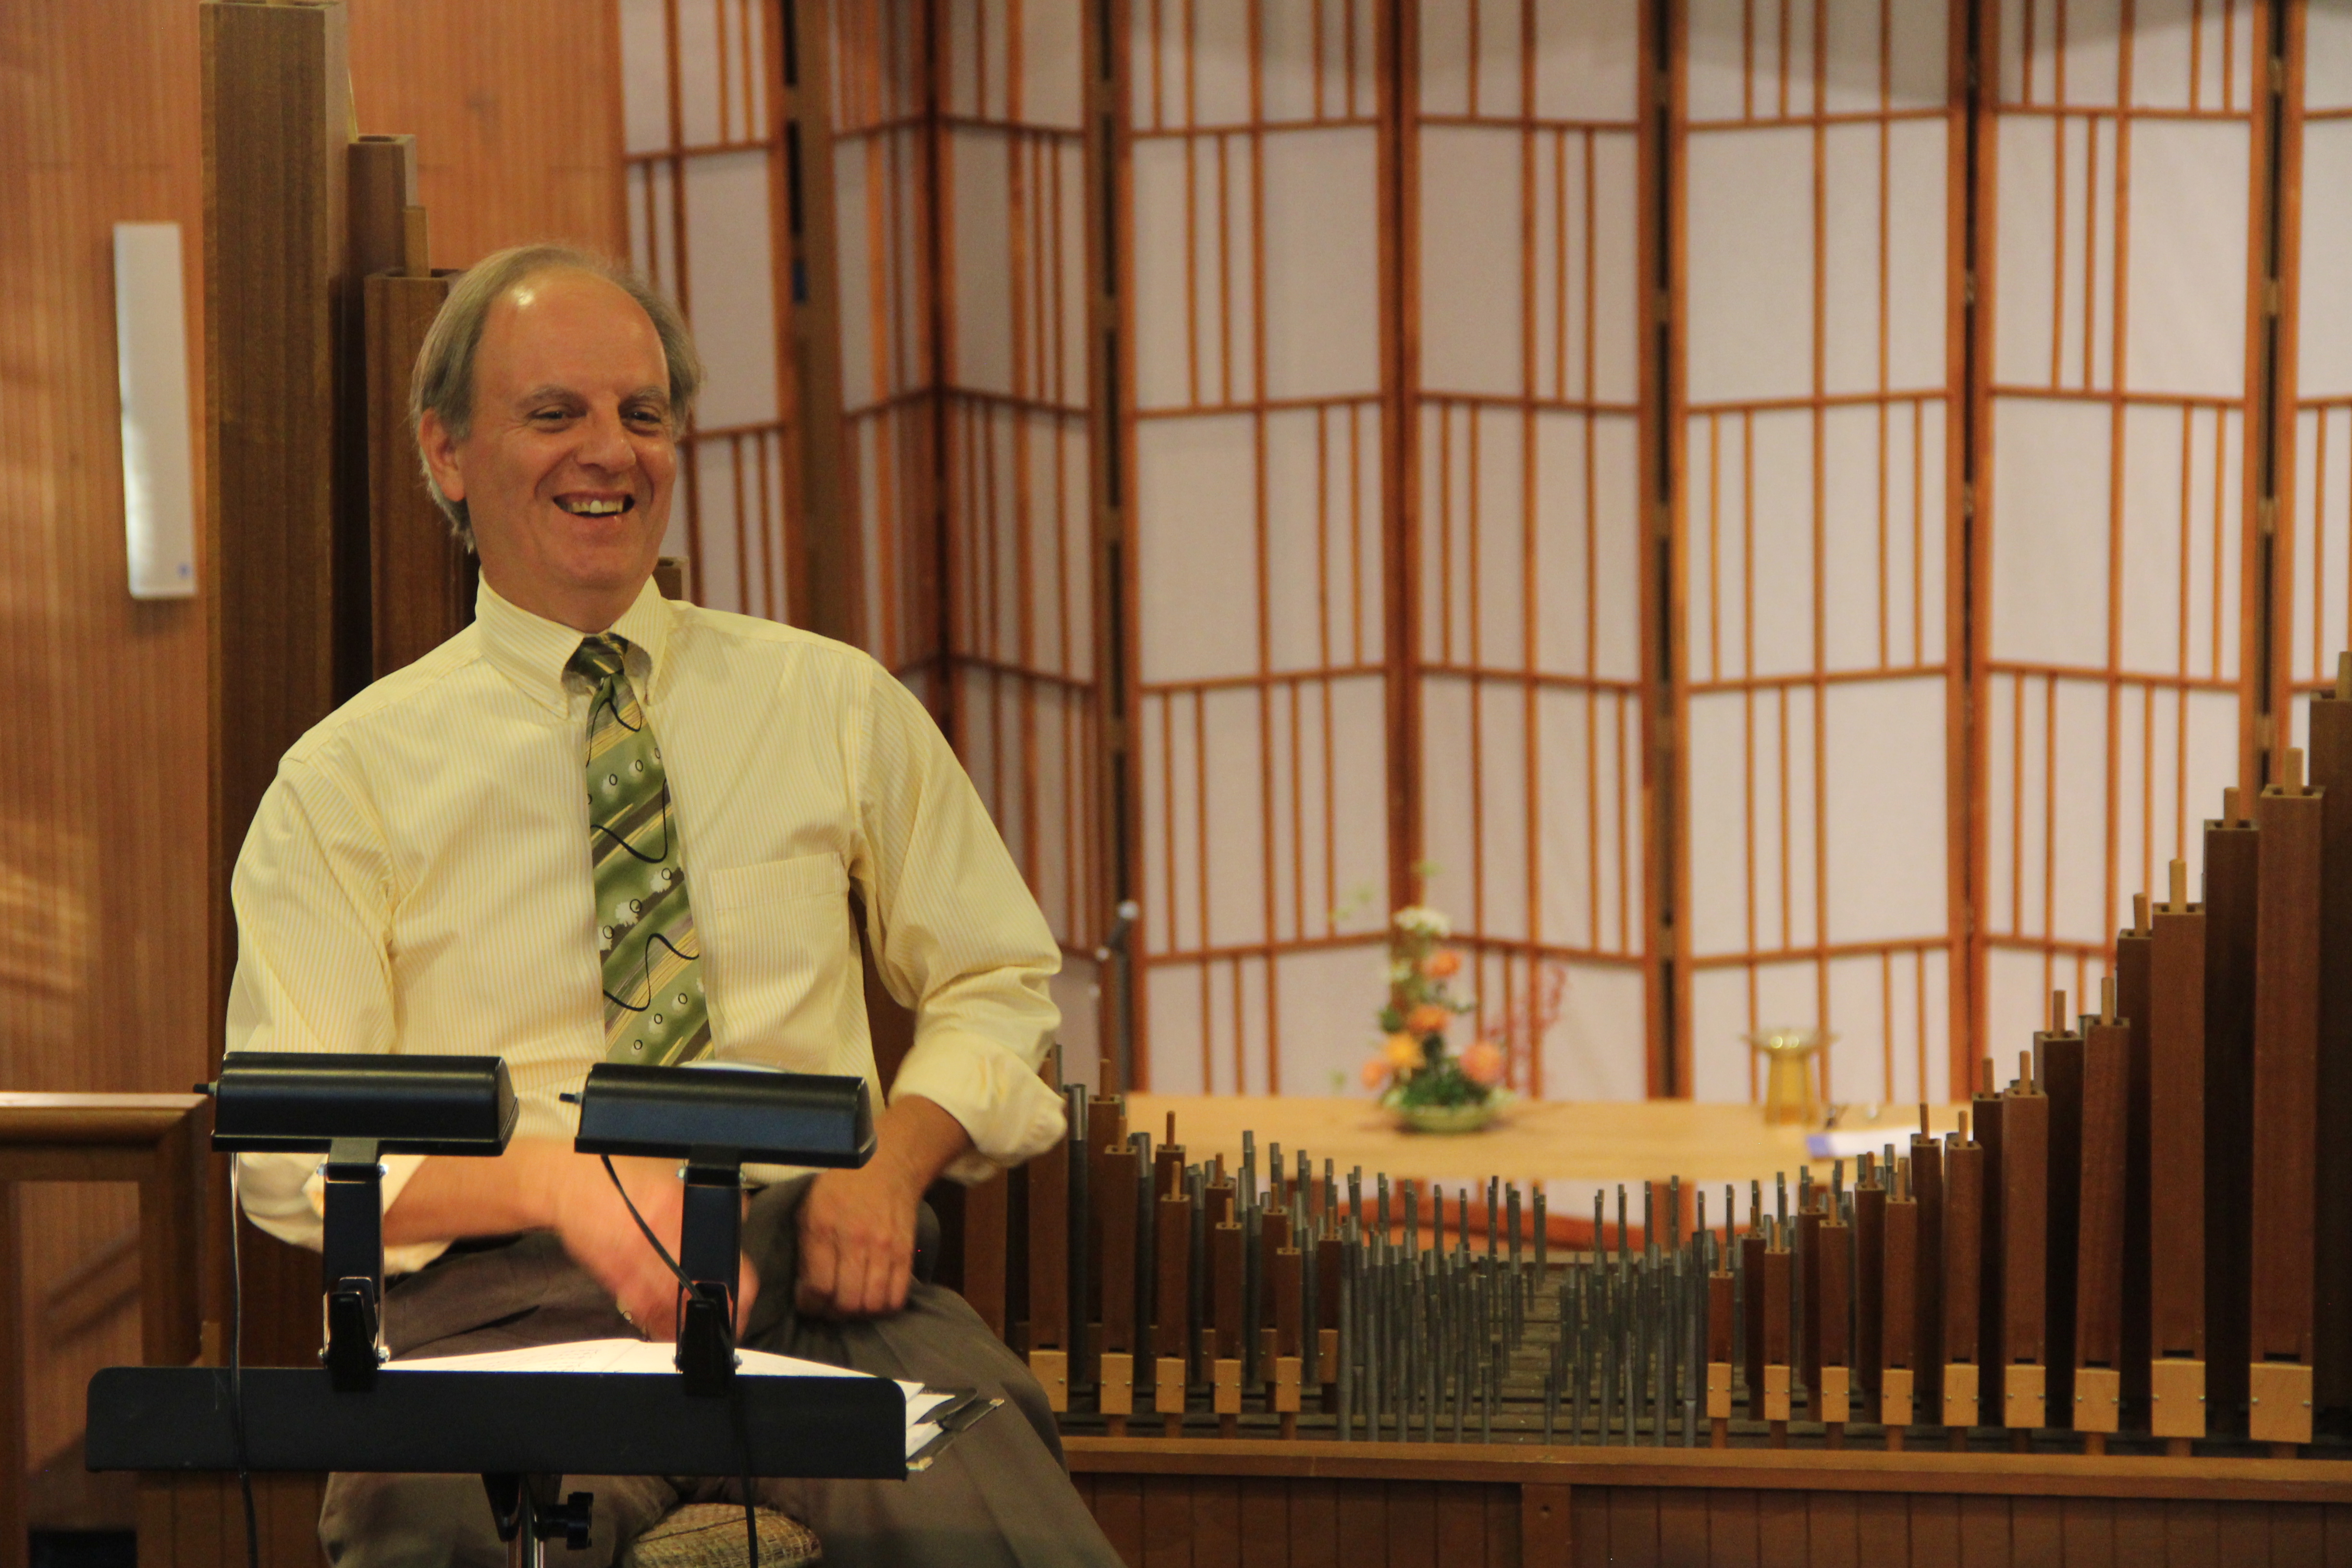 Dr. Henry Sgrecci laughing in the Choir Loft in front of a music stand